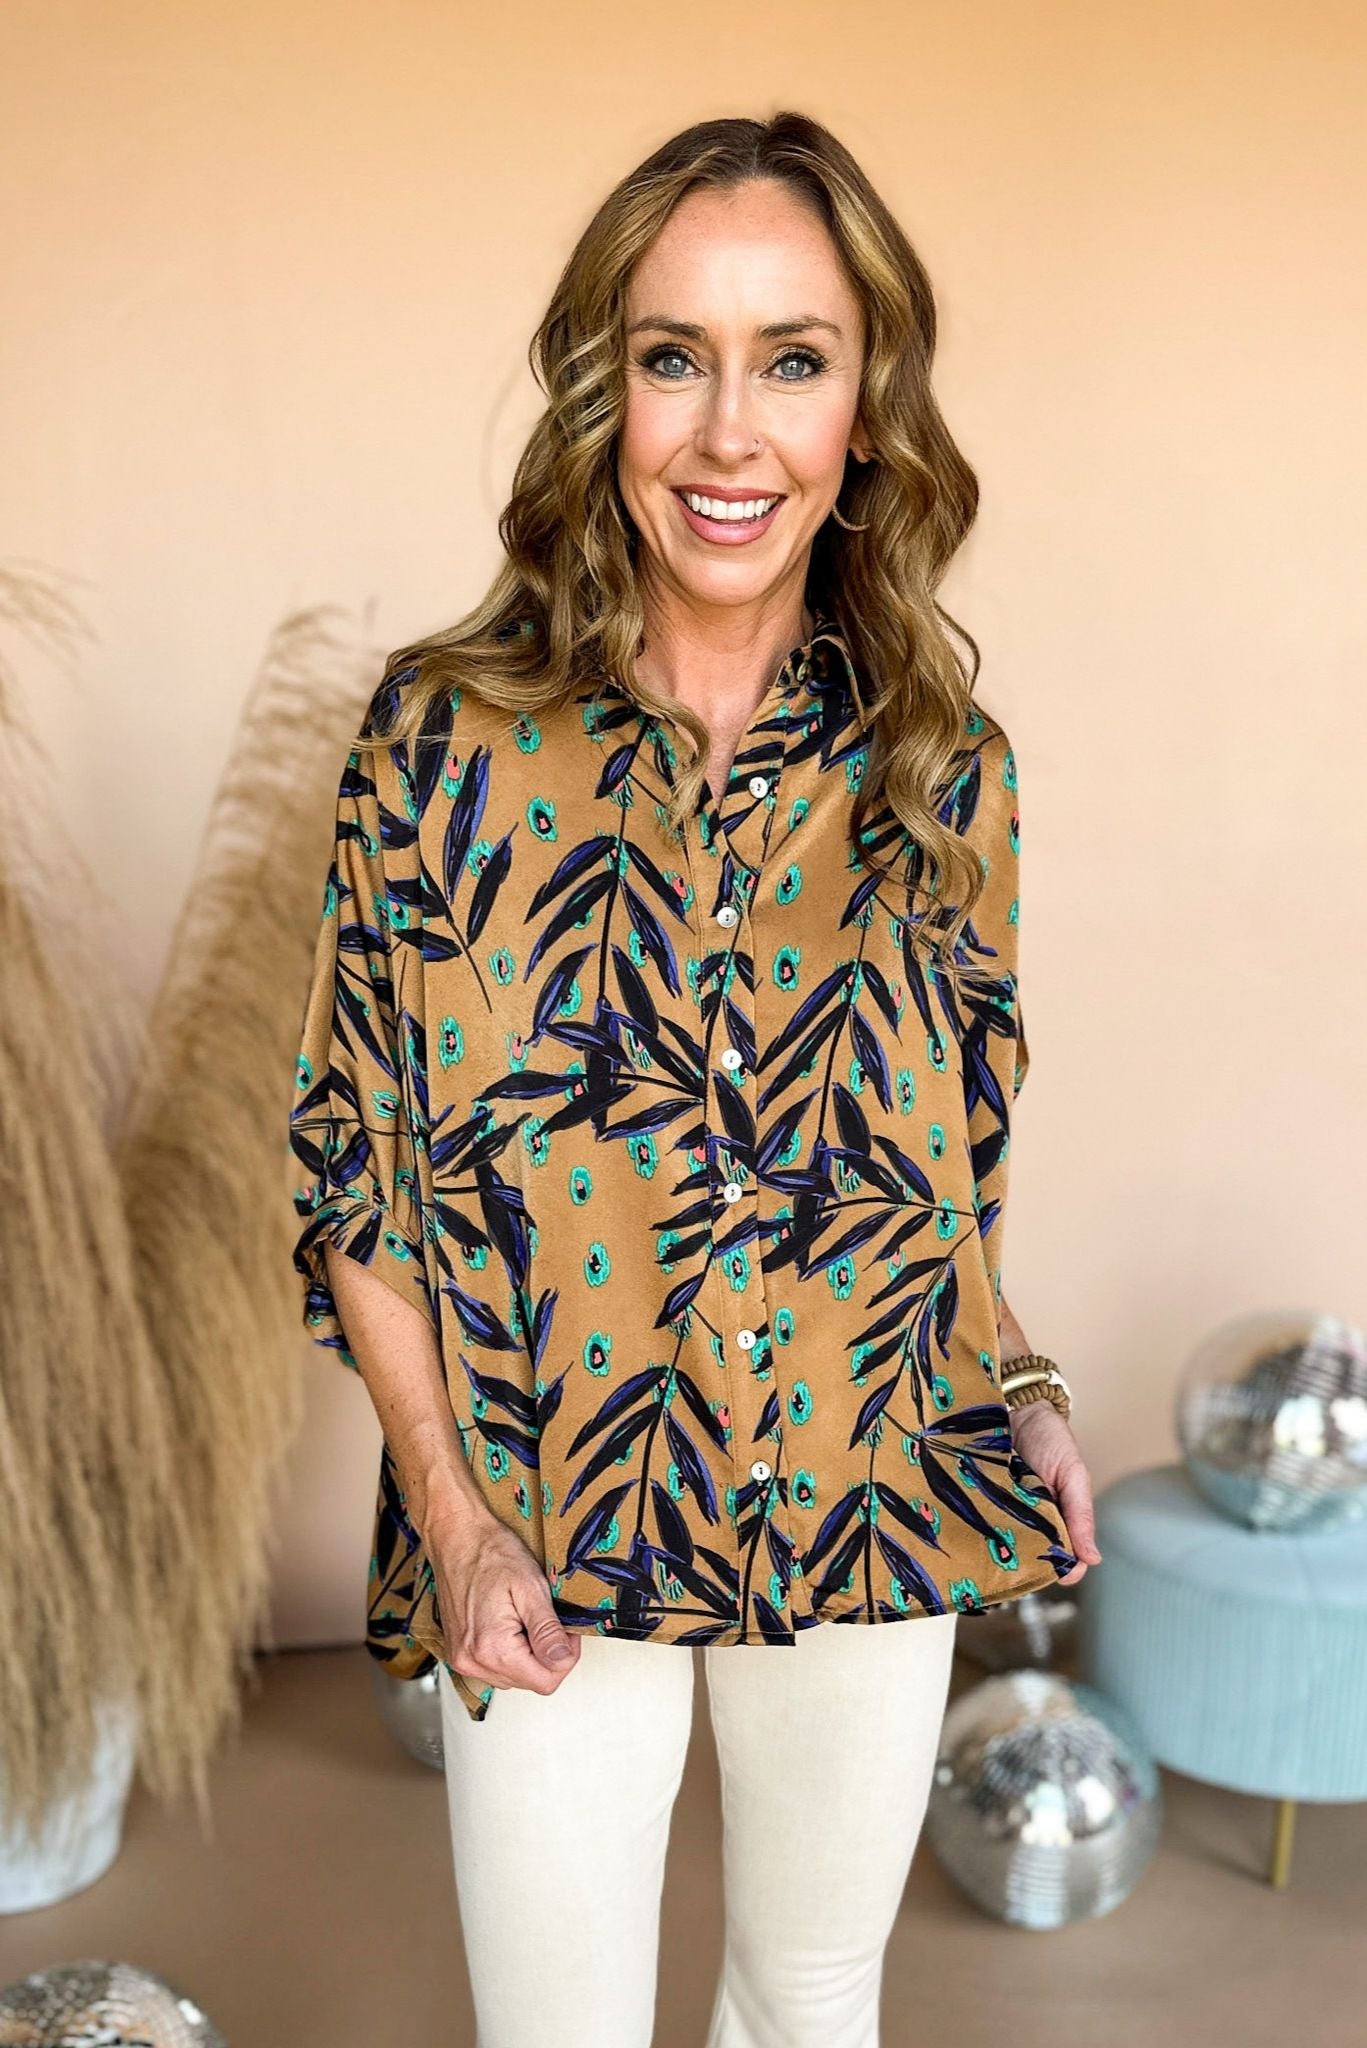 Camel Leaf Print Collared 3/4 Sleeve Tunic Top, mom chic, mom style, carpool chic, elevated style, must have top, fall top, must have fall, fall style, shop style your senses by mallory fitzsimmons